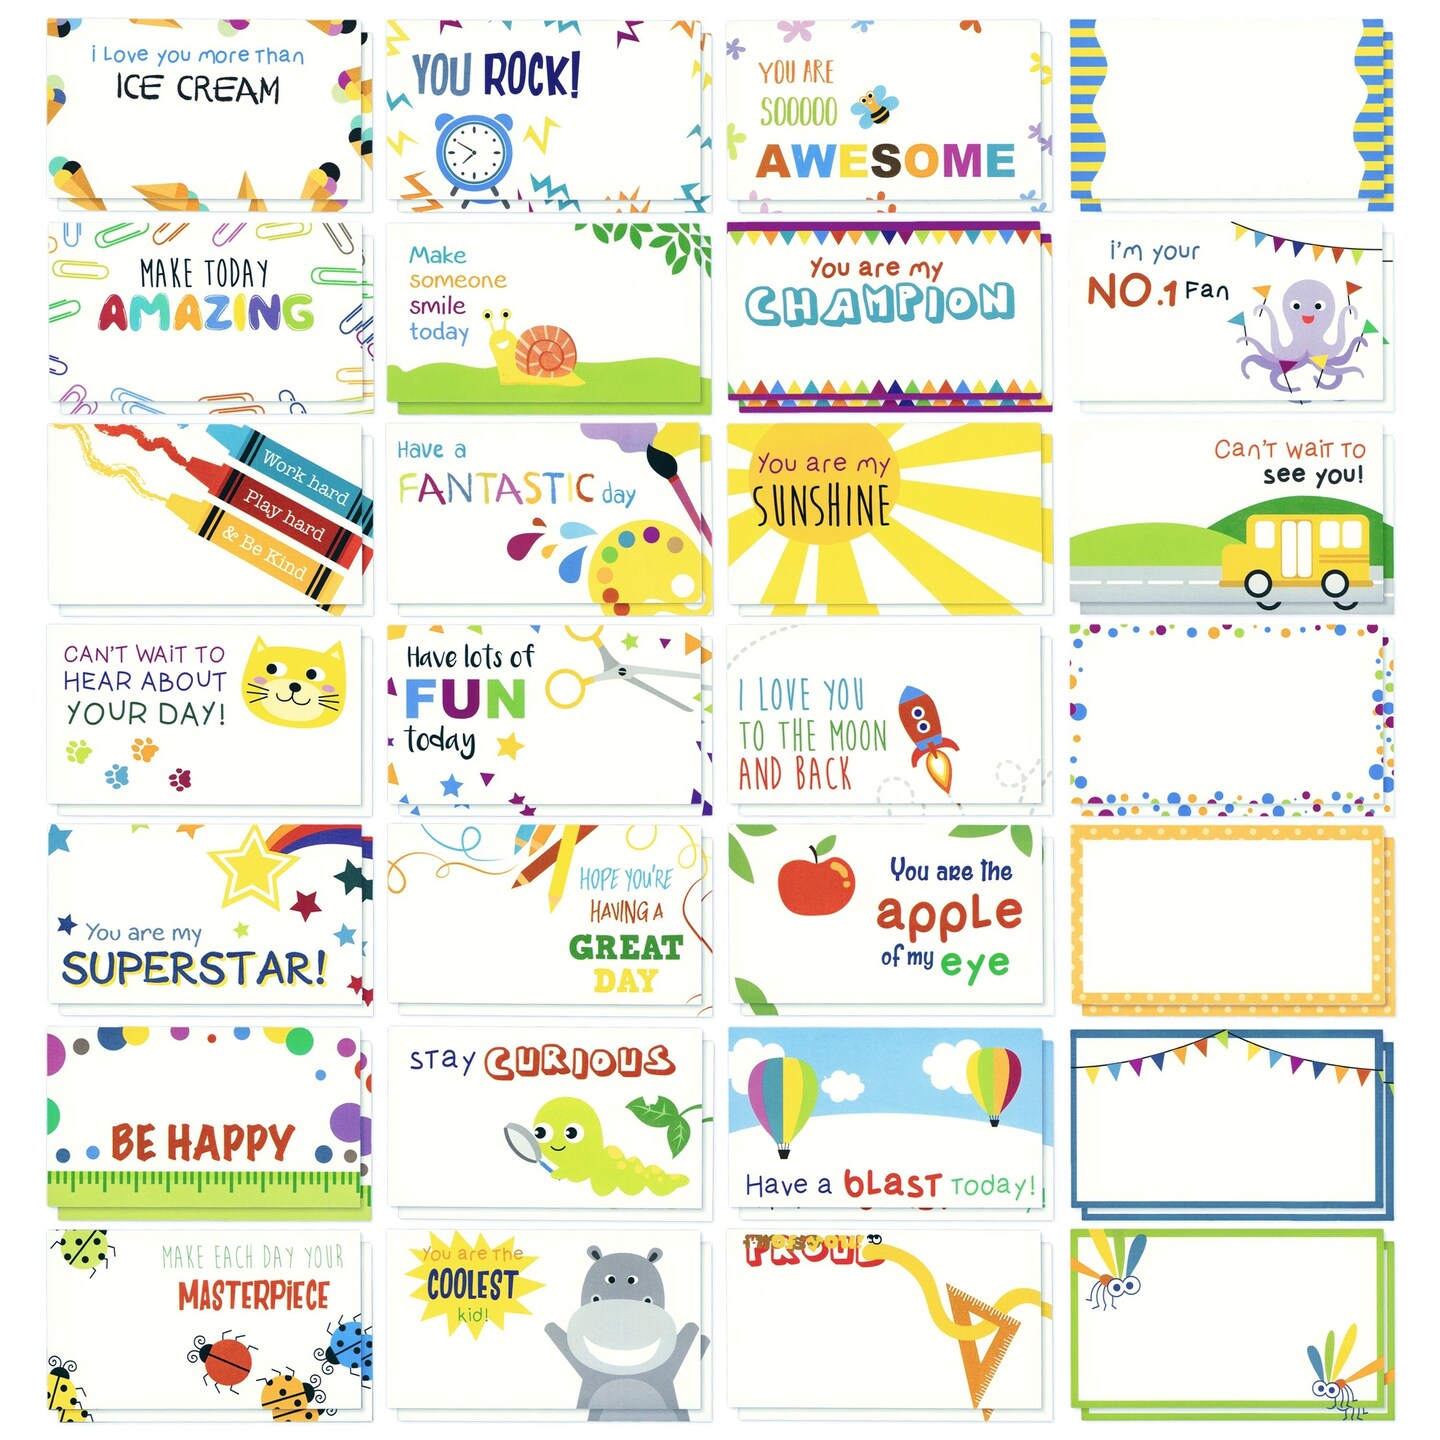 60-Pack Motivational Lunch Box Notes for Kids, Single-Sided Blank Inspirational Cards in 30 Designs, Cute, Encouraging Joke Cards for Lunchbox Essentials (2x3.5 in)